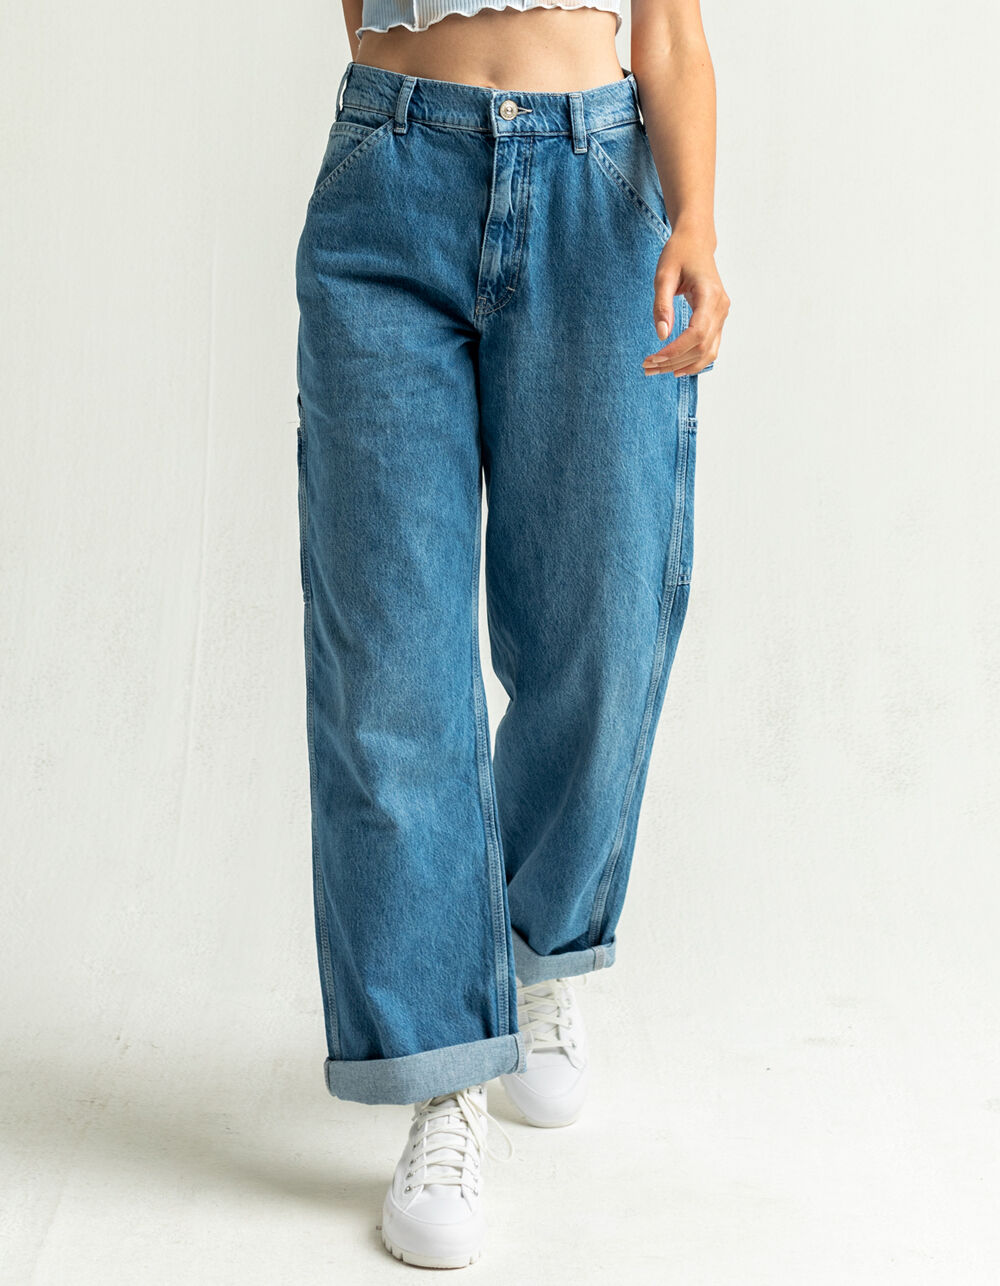 BDG Urban Outfitters Juno Womens High Waisted Carpenter Jeans - VINTAGE ...